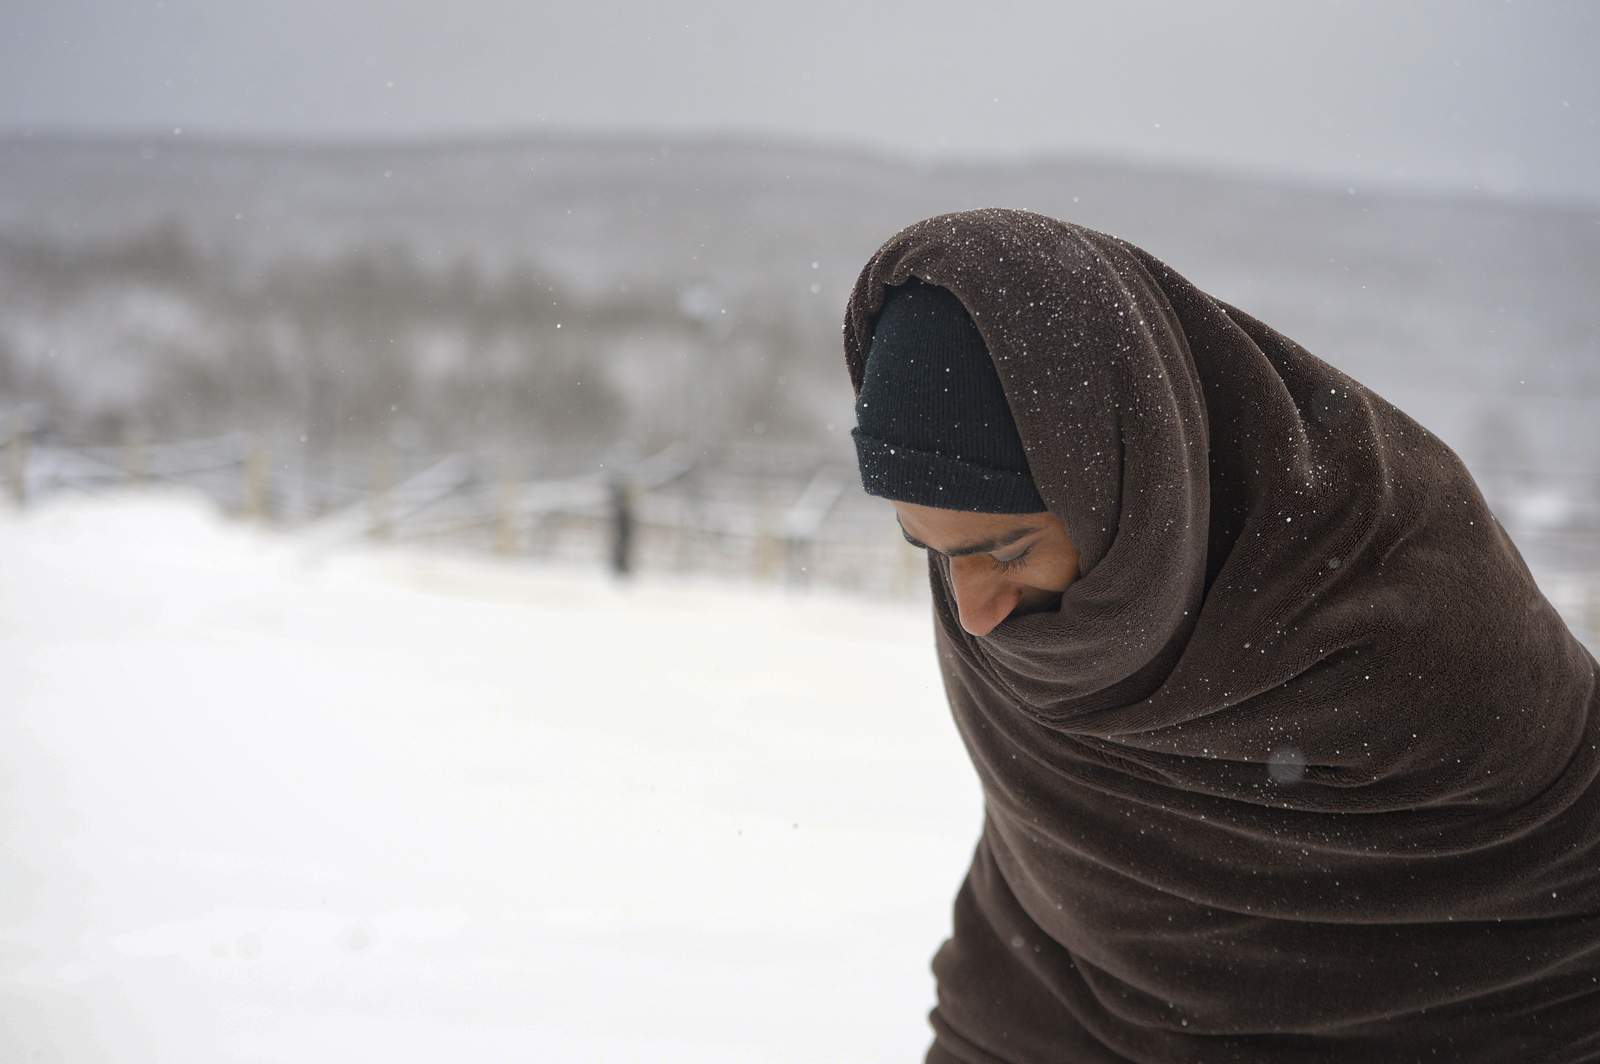 Hundreds of migrants freezing in heavy snow in Bosnia camp